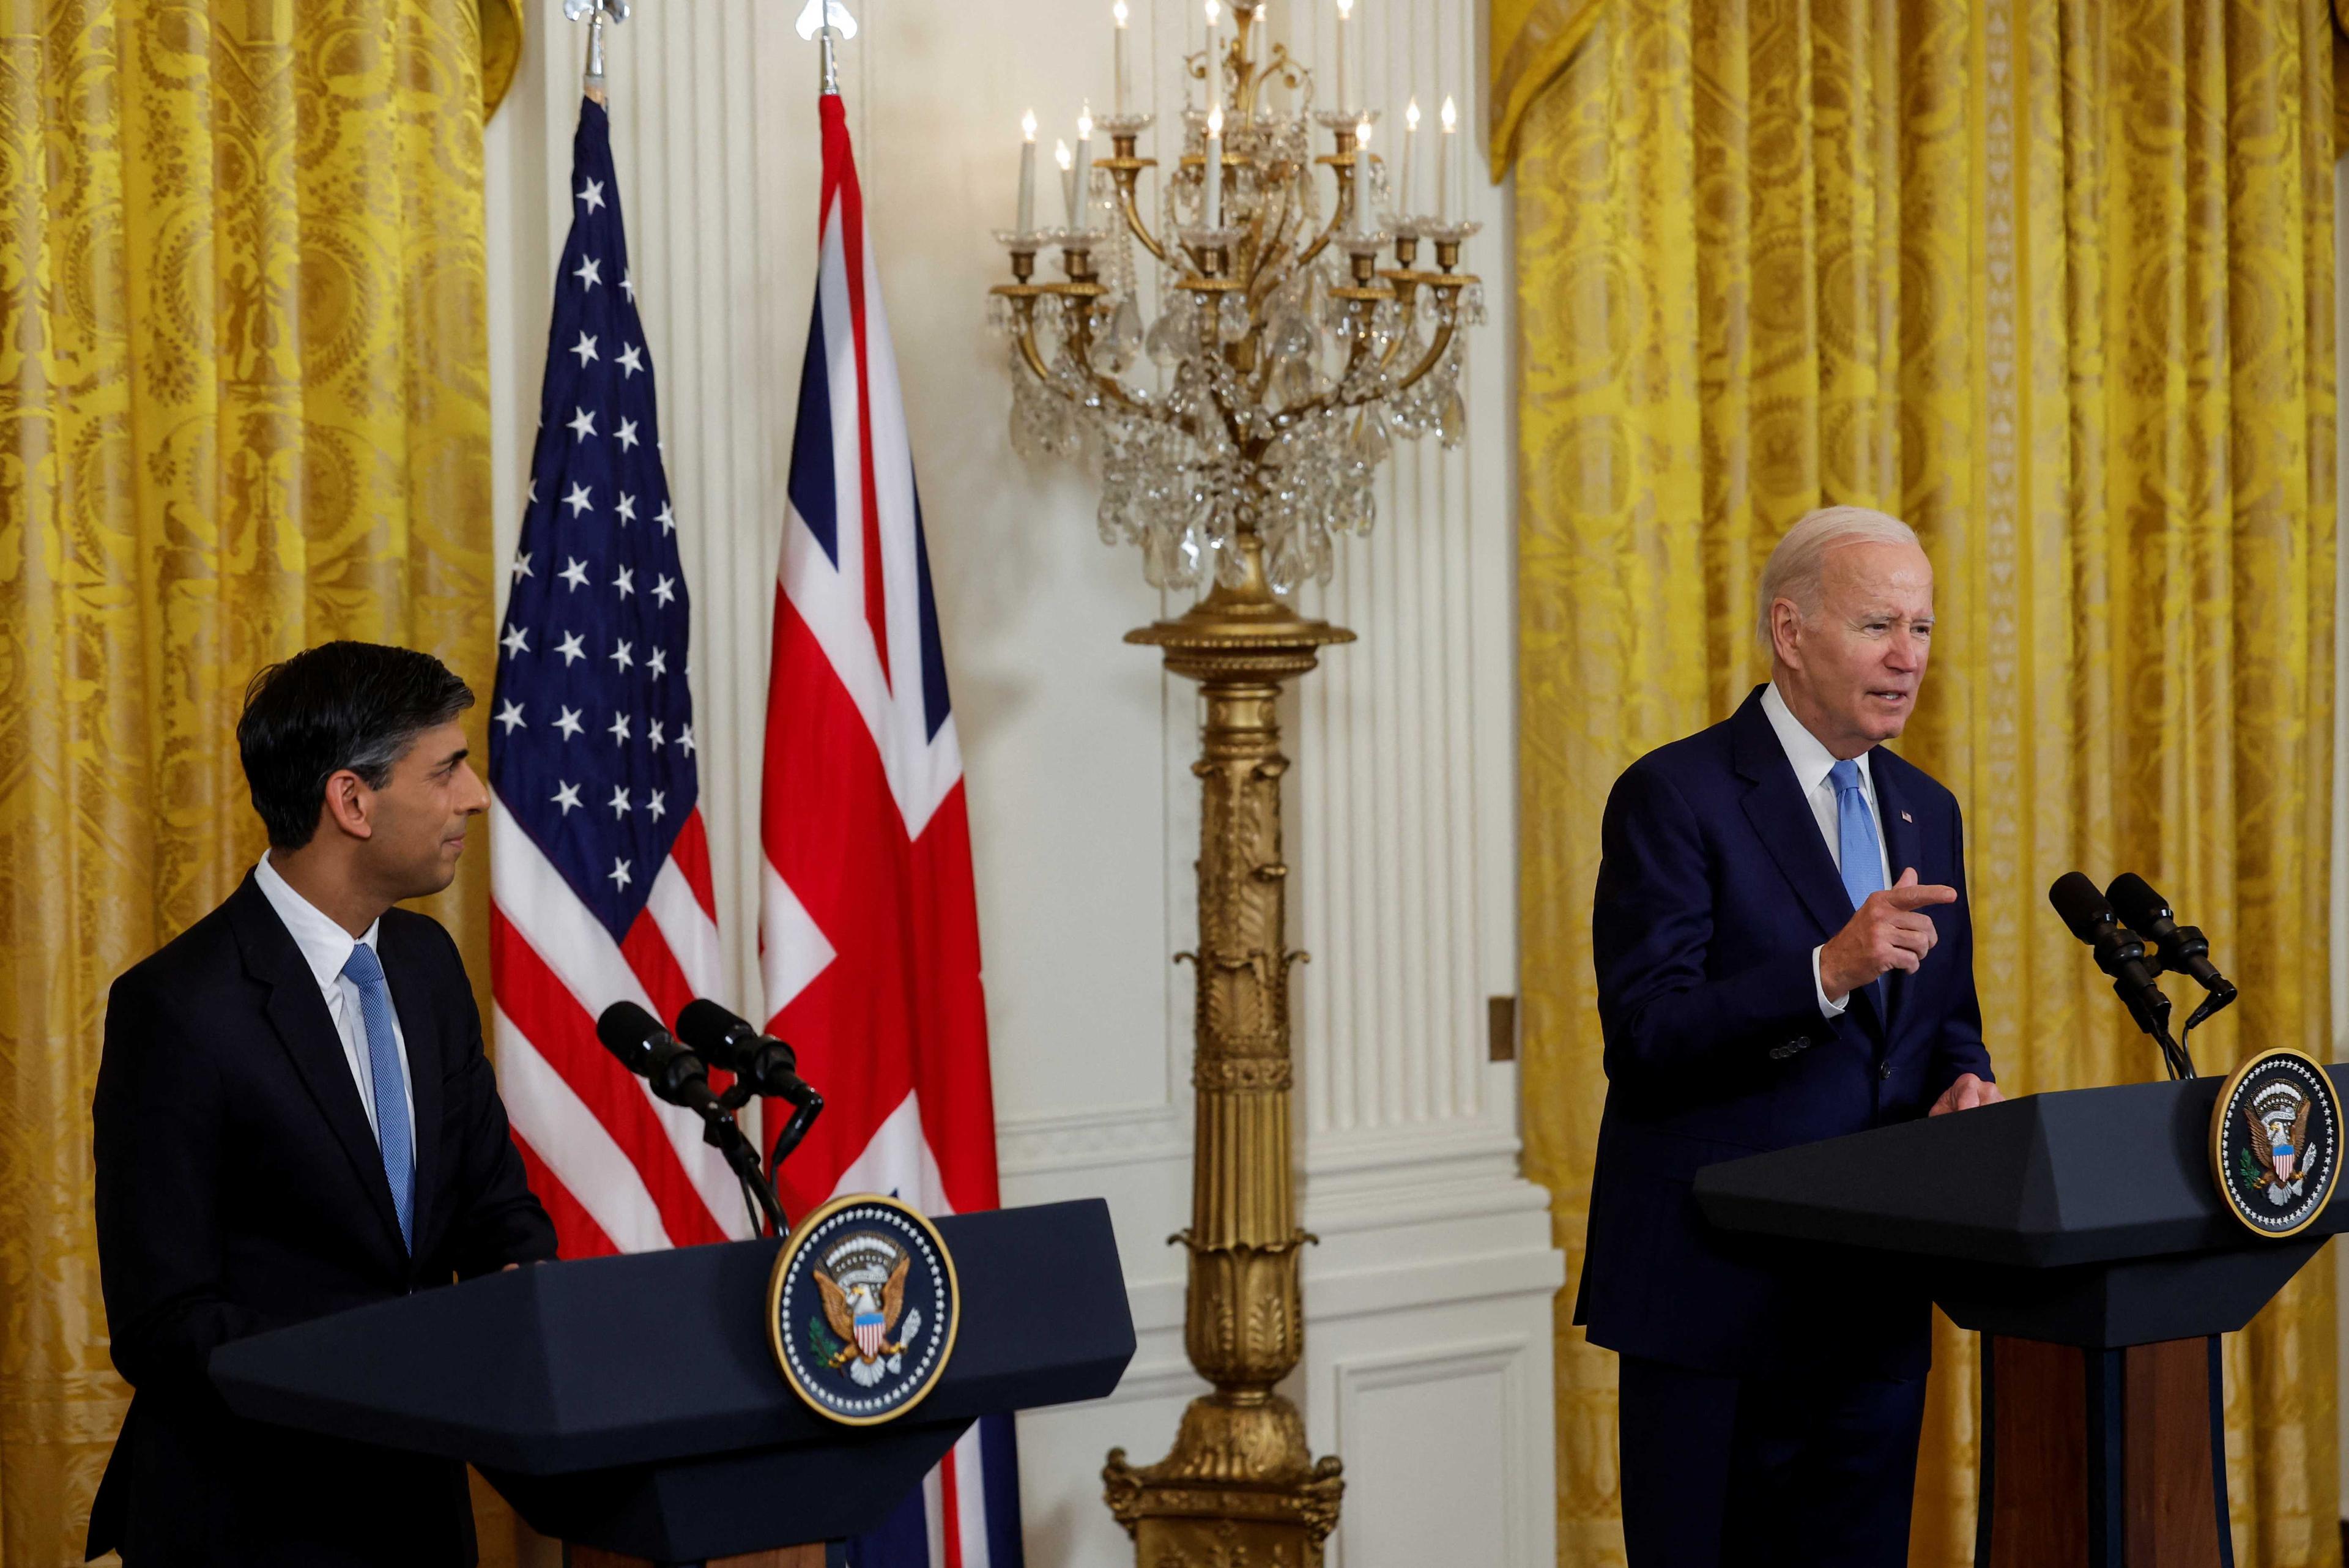 Britain's Prime Minister Rishi Sunak listens as US President Joe Biden addresses a joint news conference in the East Room at the White House in Washington, US, June 8. Photo: Reuters